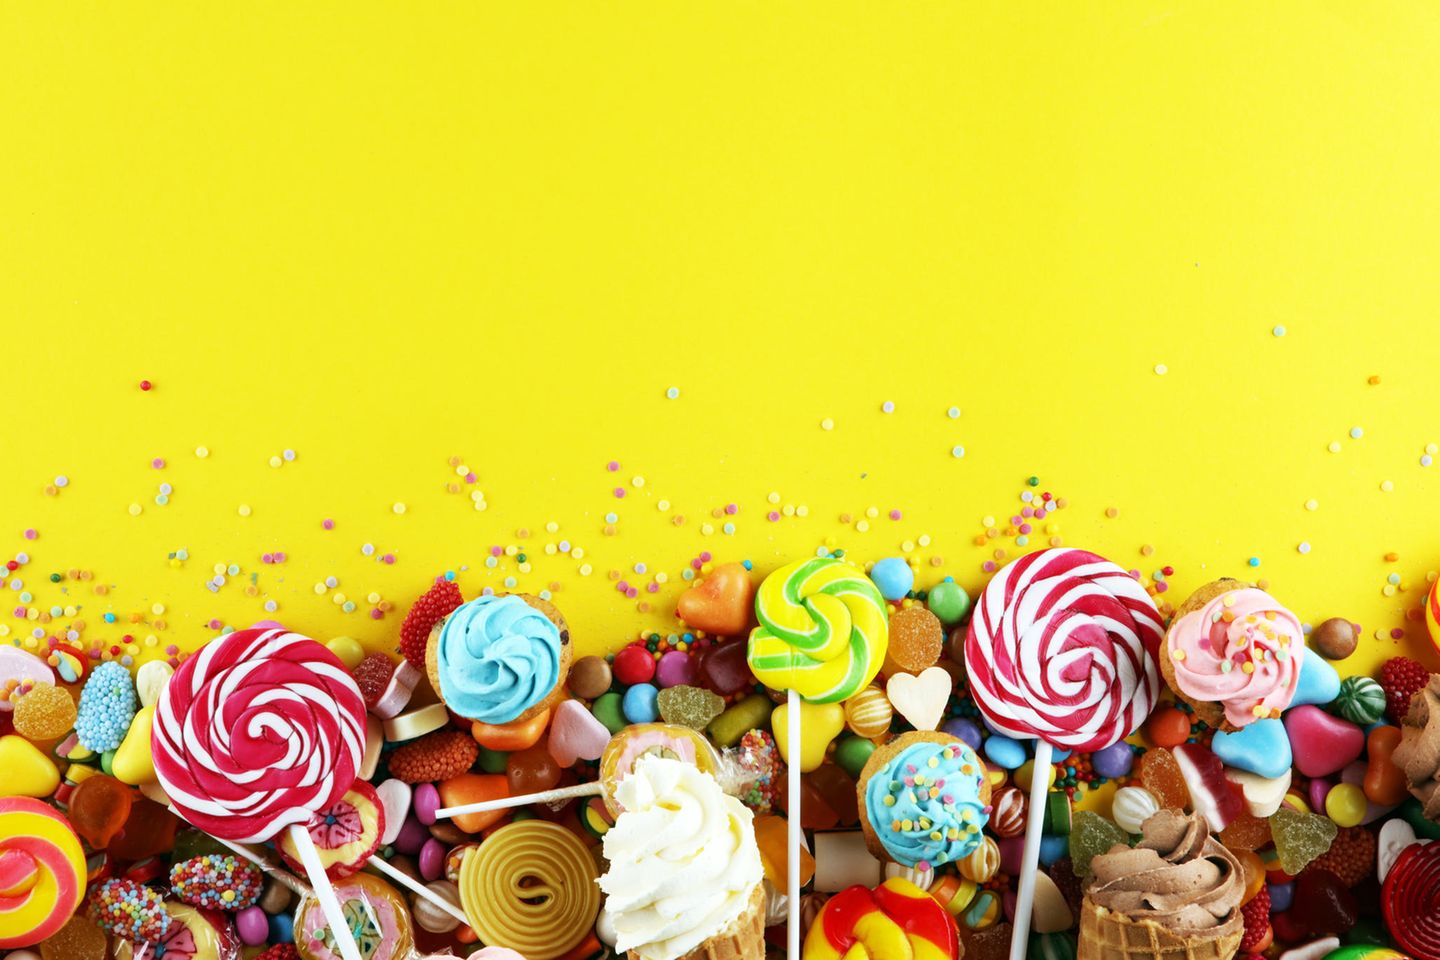 Various sweets on a yellow background